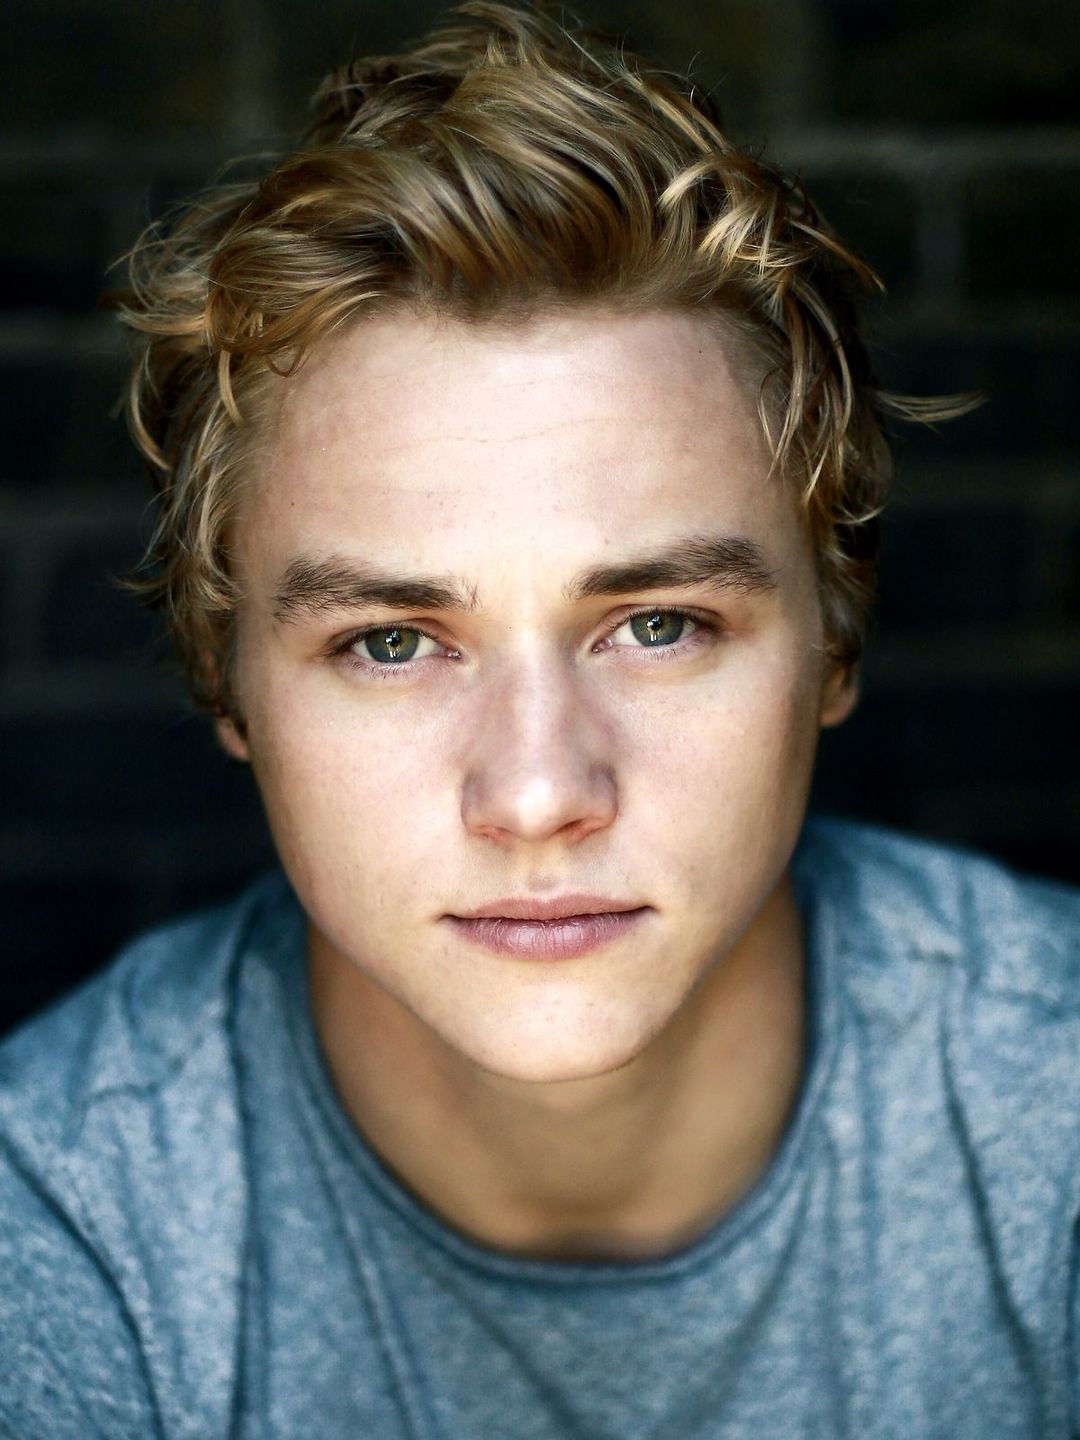 Ben Hardy who is his father